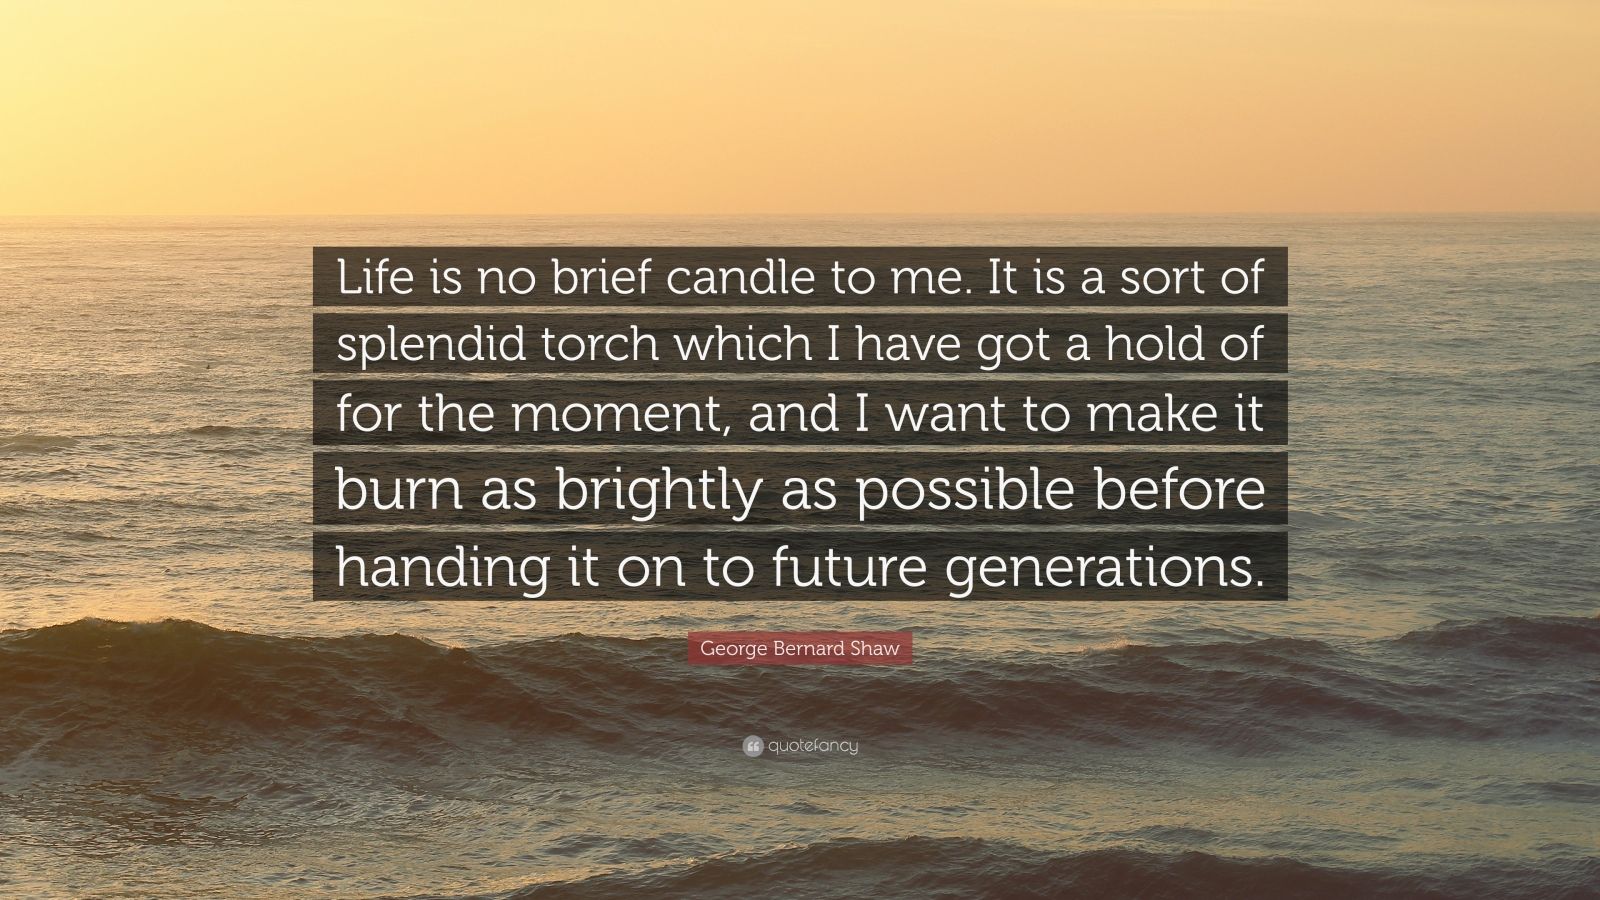 Bernard Shaw Quote “Life is no brief candle to me. It is a sort